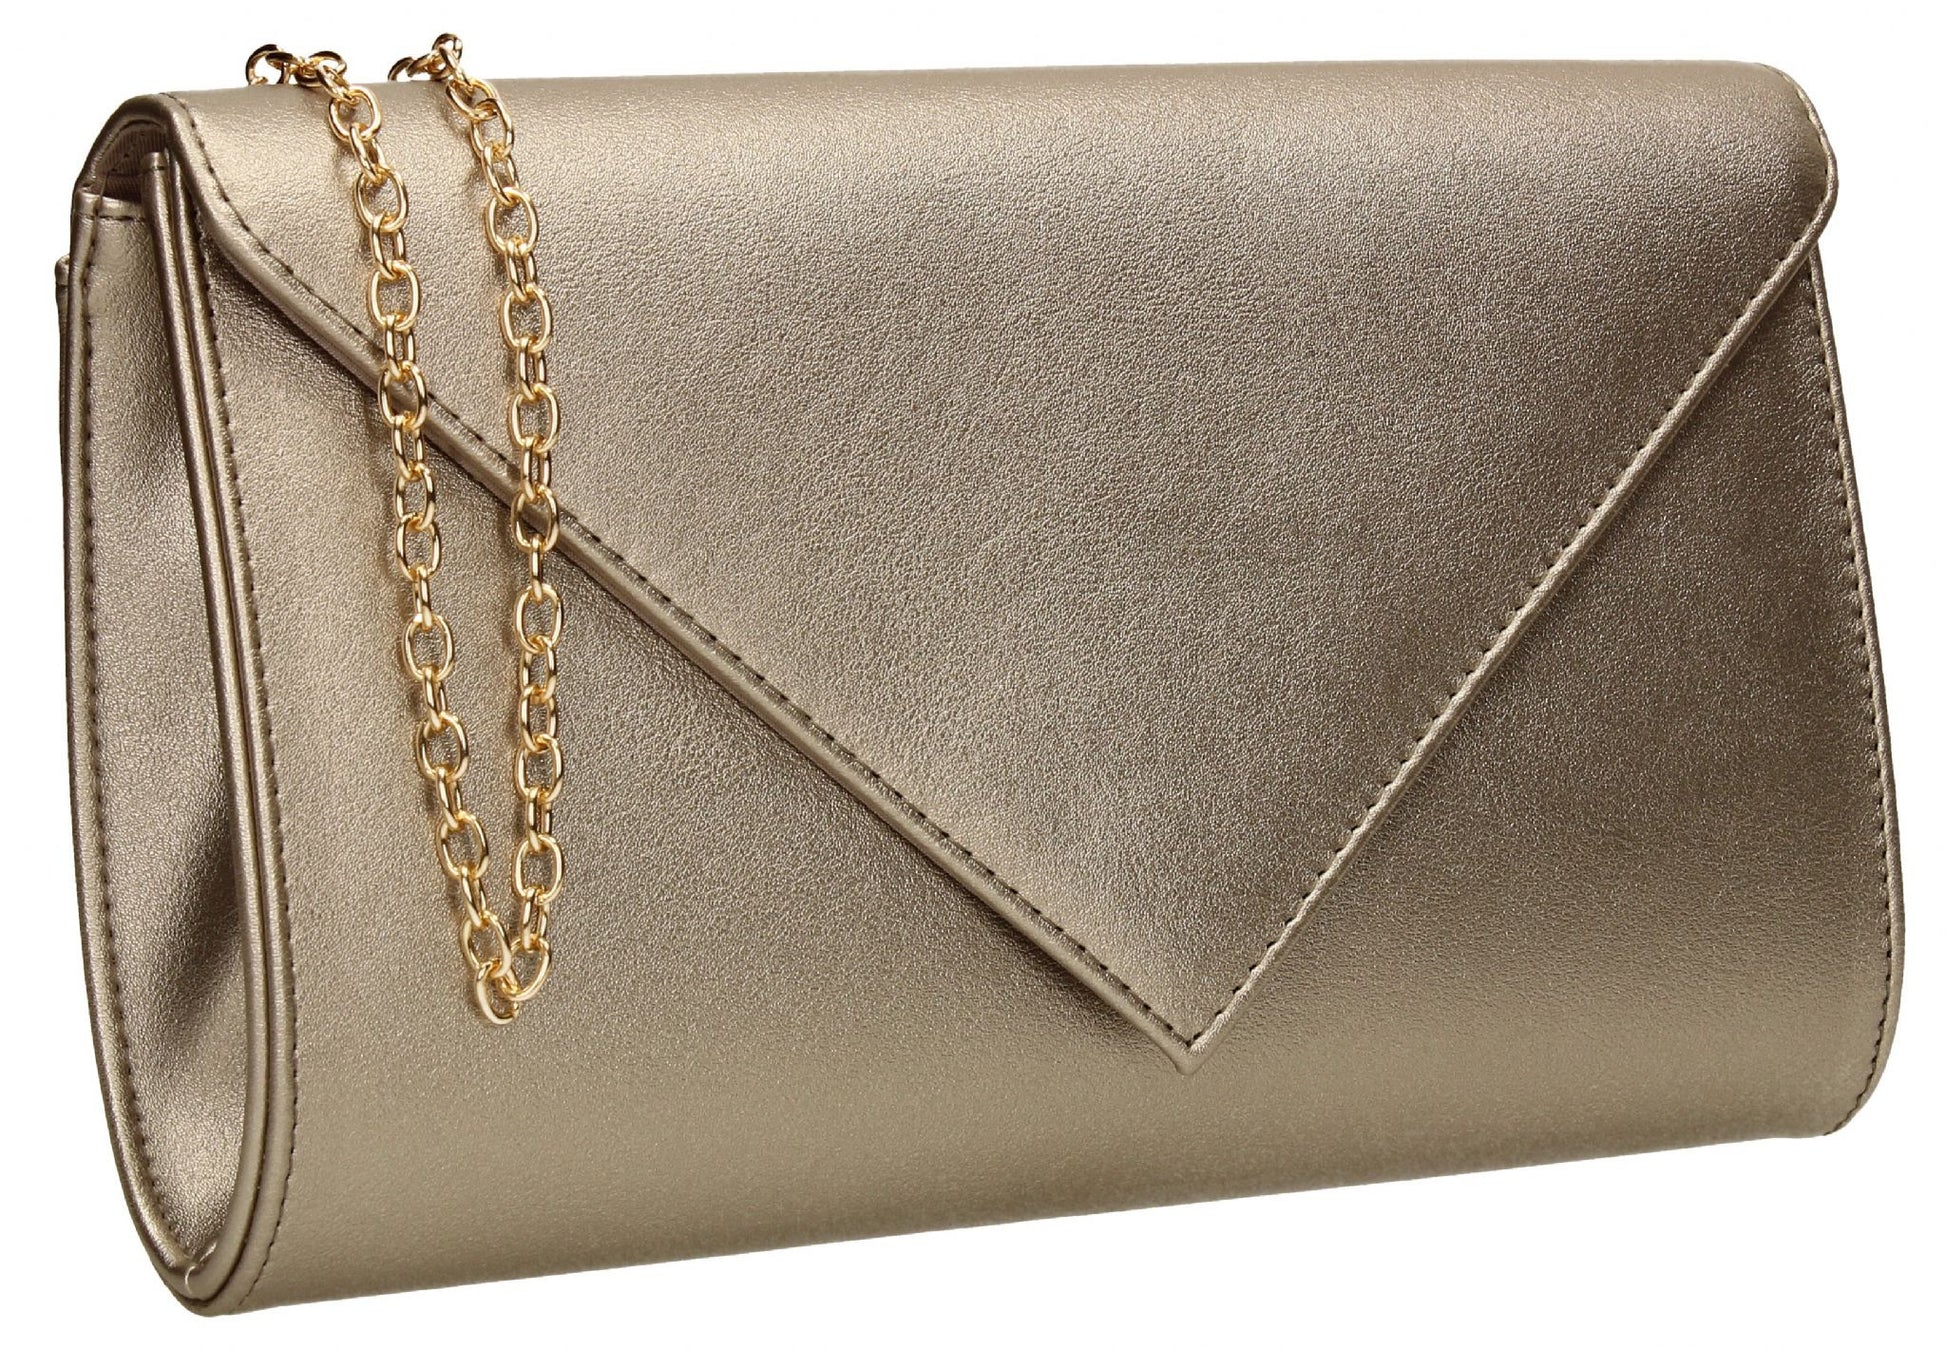 SWANKYSWANS Seraphina Clutch Bag Pewter Cute Cheap Clutch Bag For Weddings School and Work